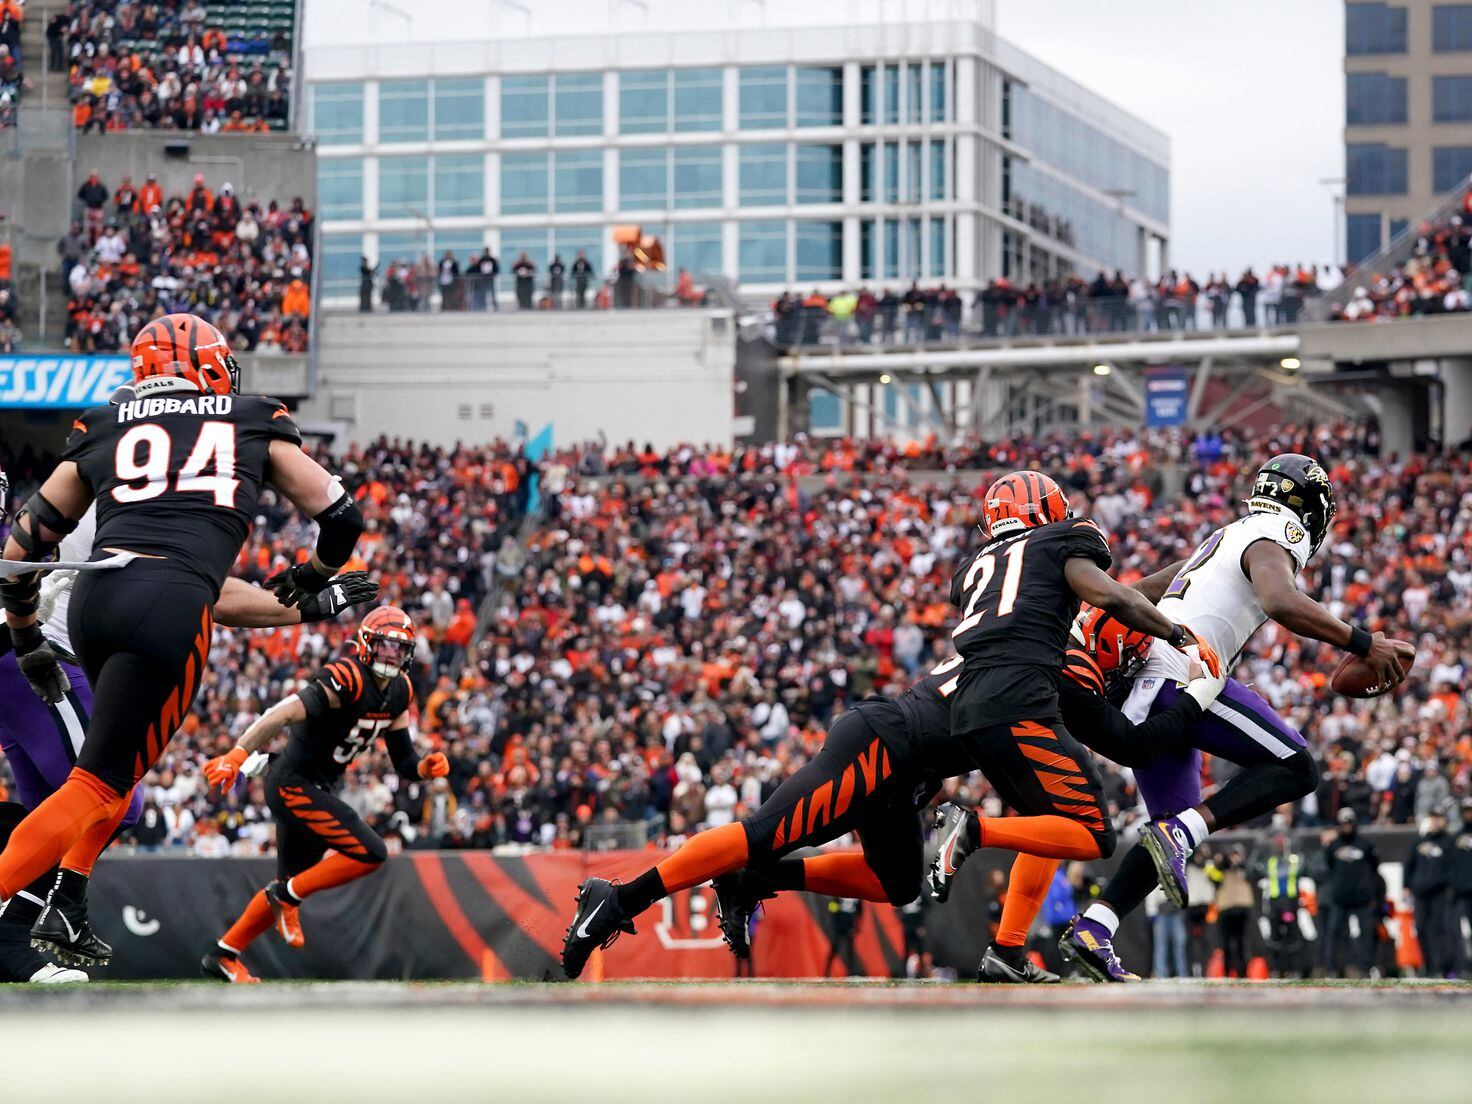 Bengals-Ravens 2023 NFL Wild Card injury report: Bengals only rule out one  player - DraftKings Network